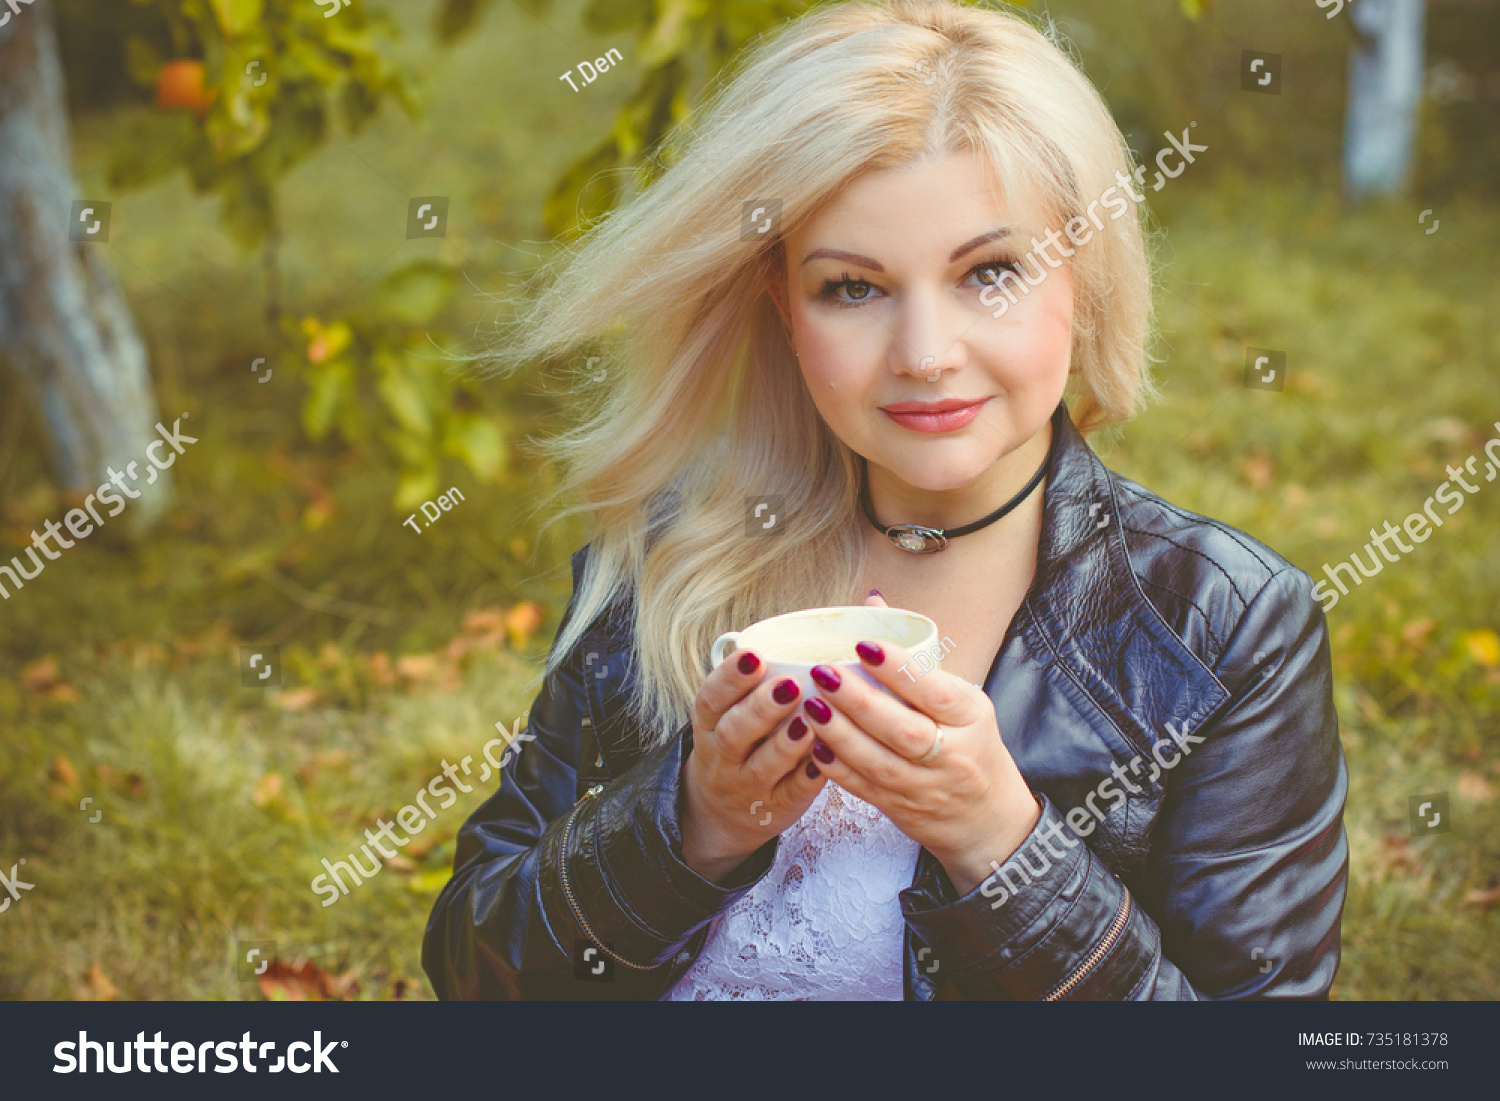 Middle Age Stylish Blonde Hair Pretty Stock Photo Edit Now 735181378